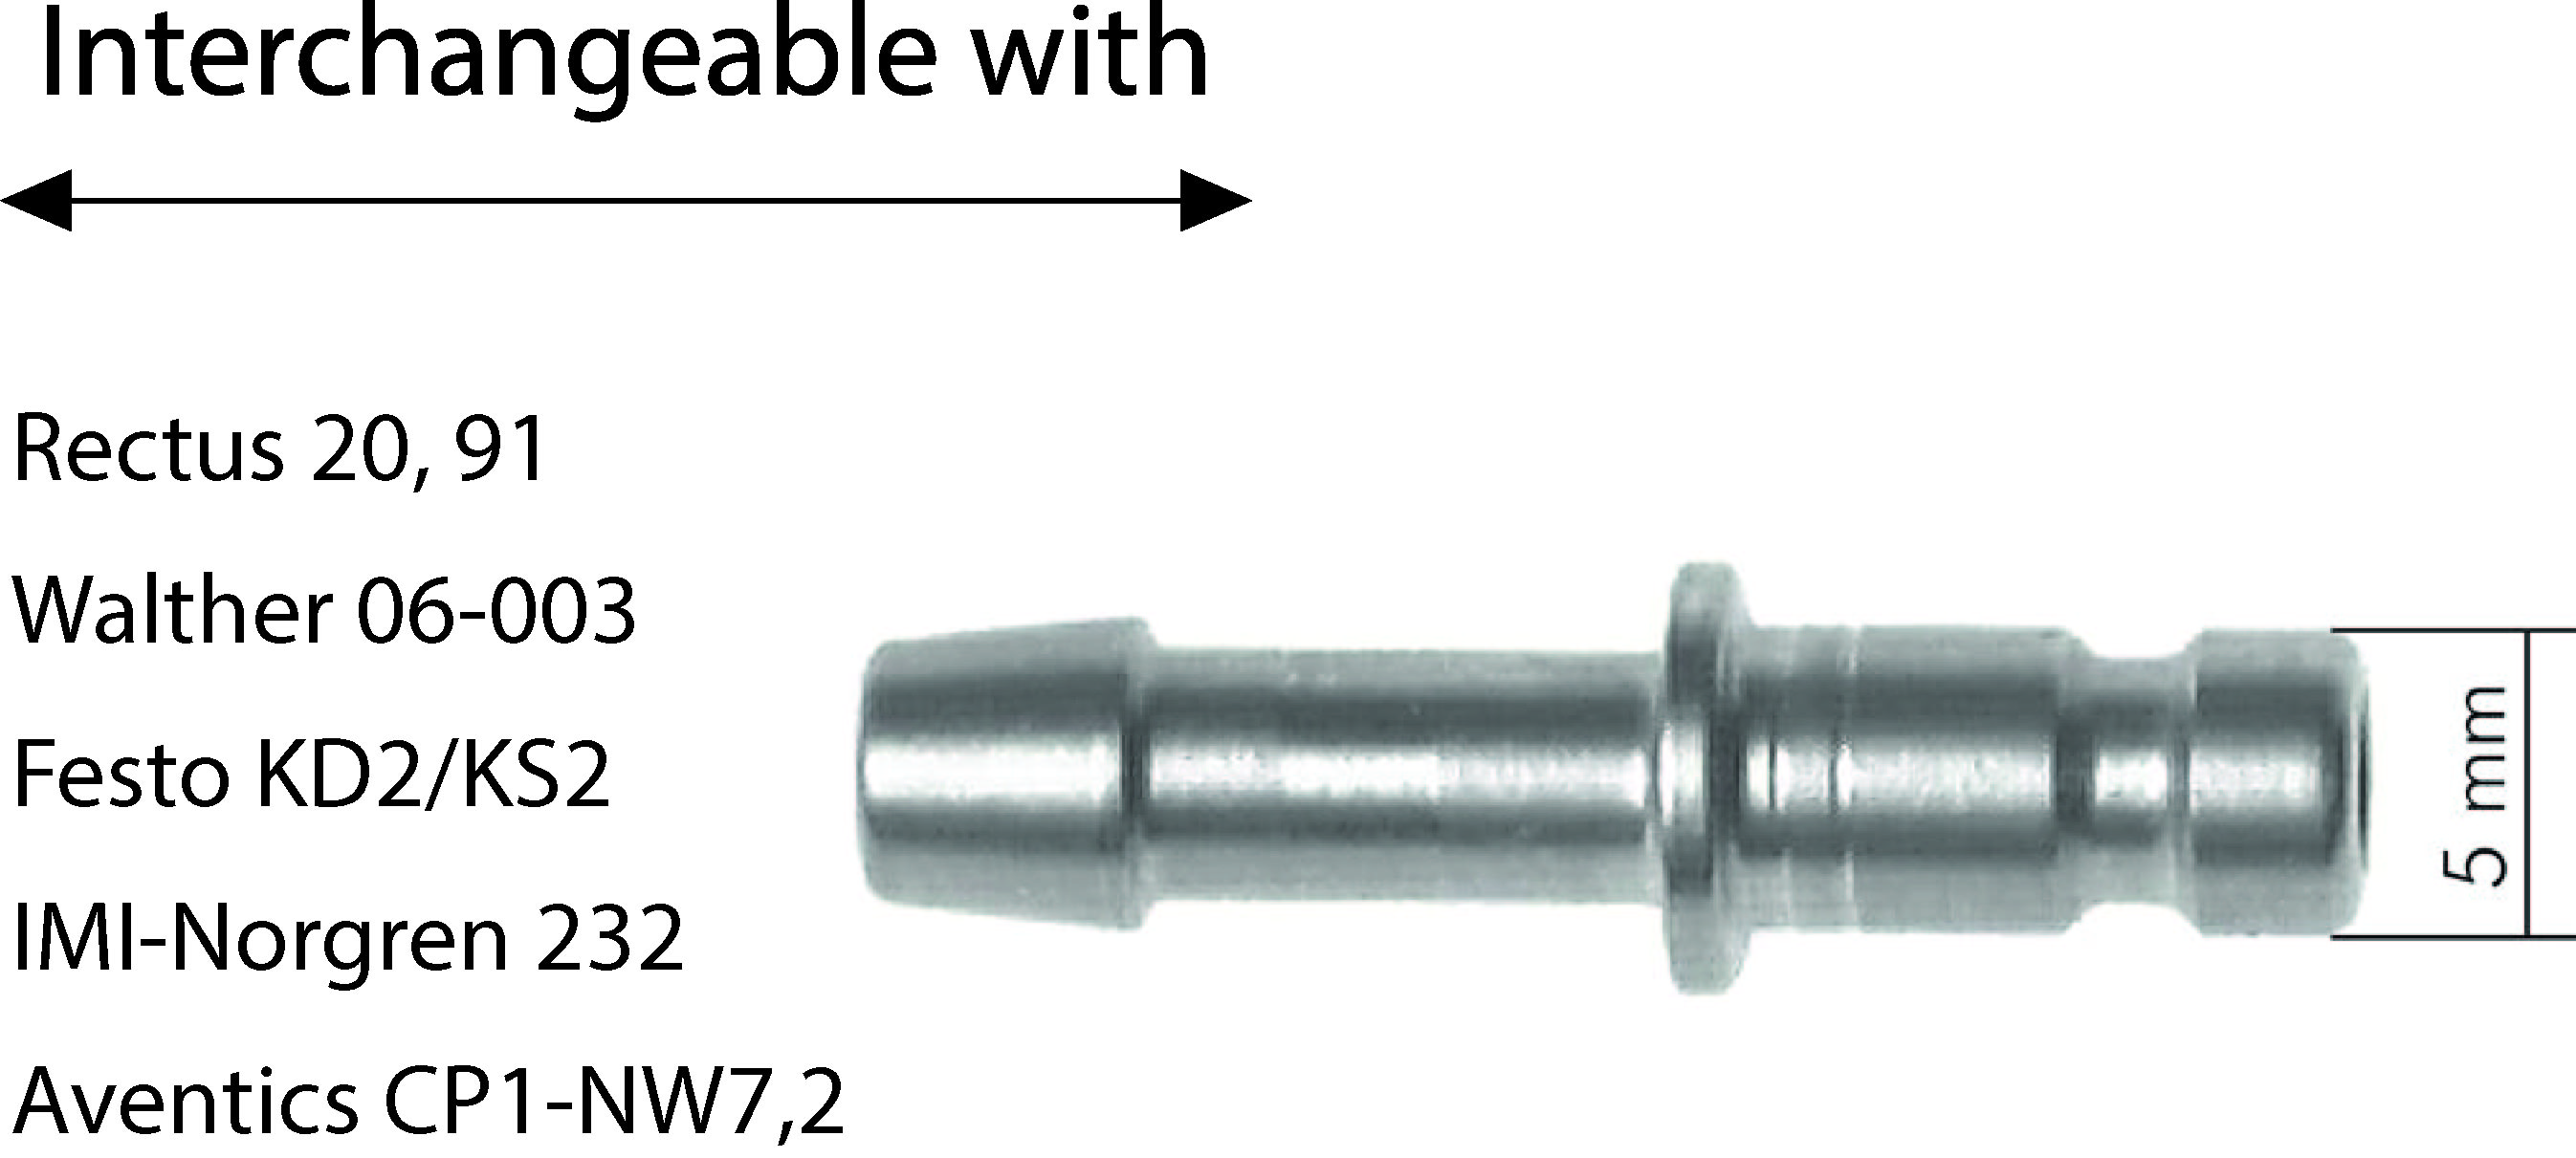 TD NW 7,2 Double-sided lockable